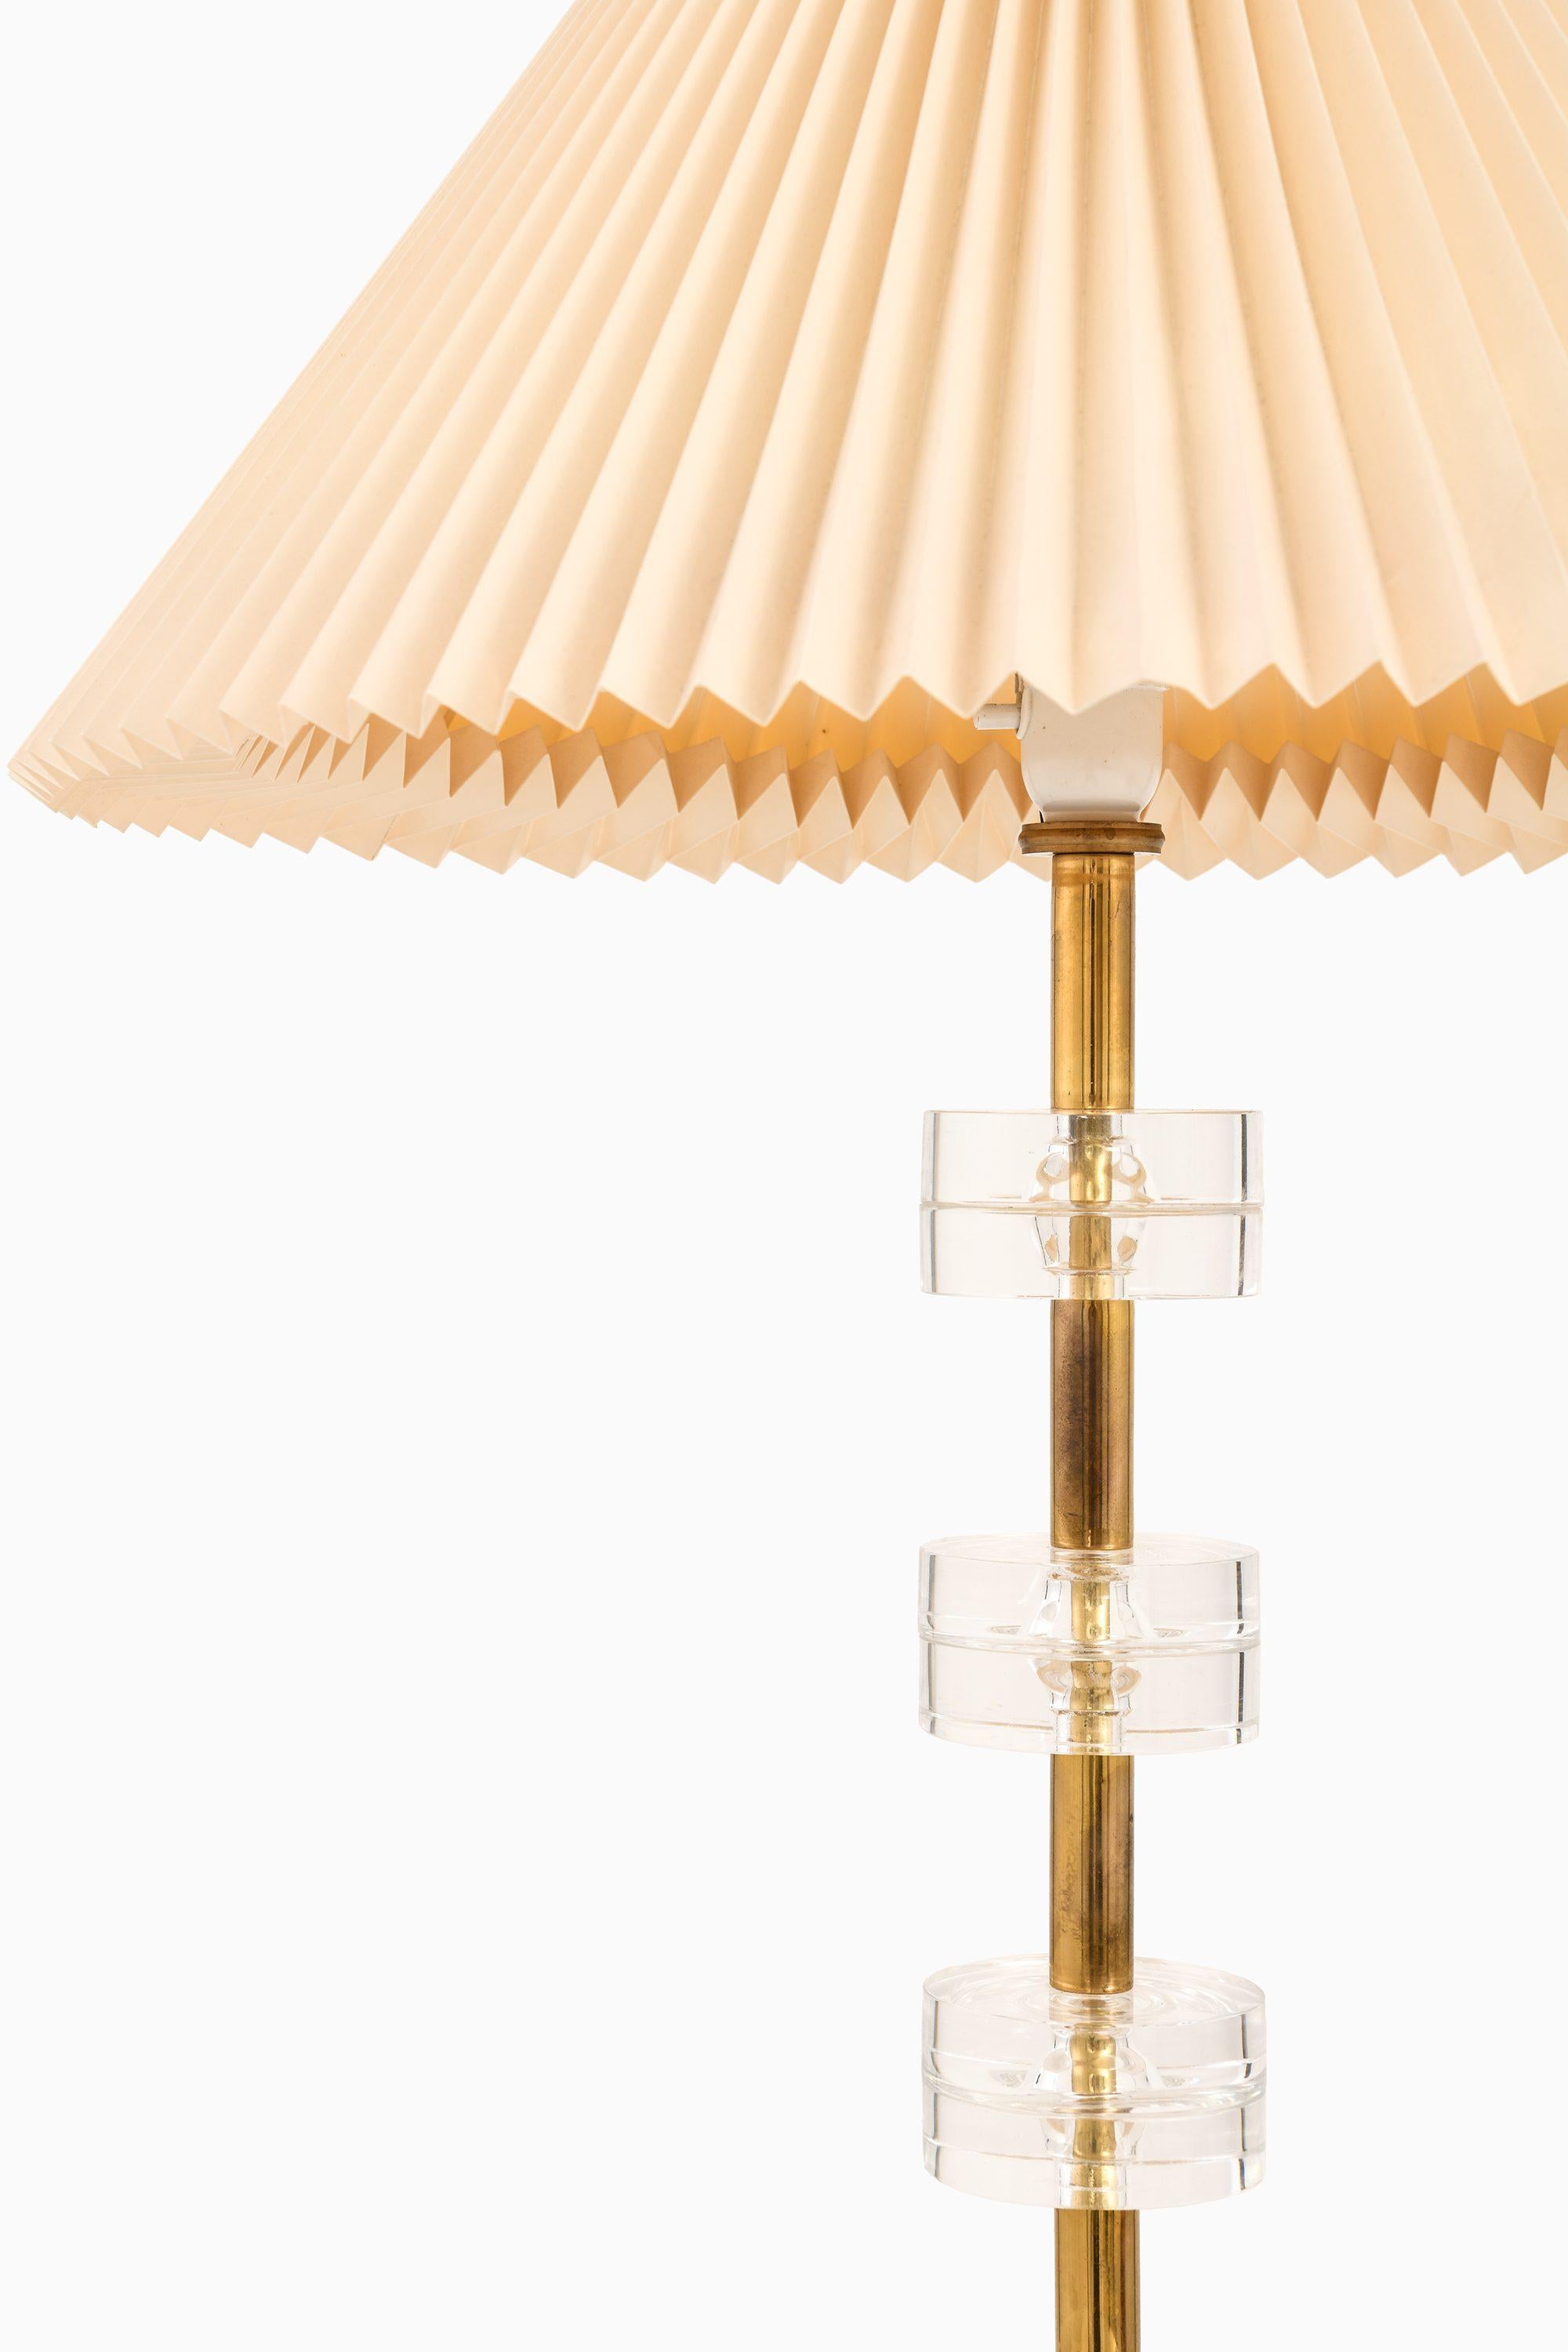 Table Lamp in Brass and Glass by Carl Fagerlund, 1960′s

Additional Information:
Material: Brass and glass
Style: Mid century, Scandinavian
Rare table lamp model RD1987
Produced by Orrefors in Sweden
Dimensions (W x D x H): 11 x 11 x 64.5